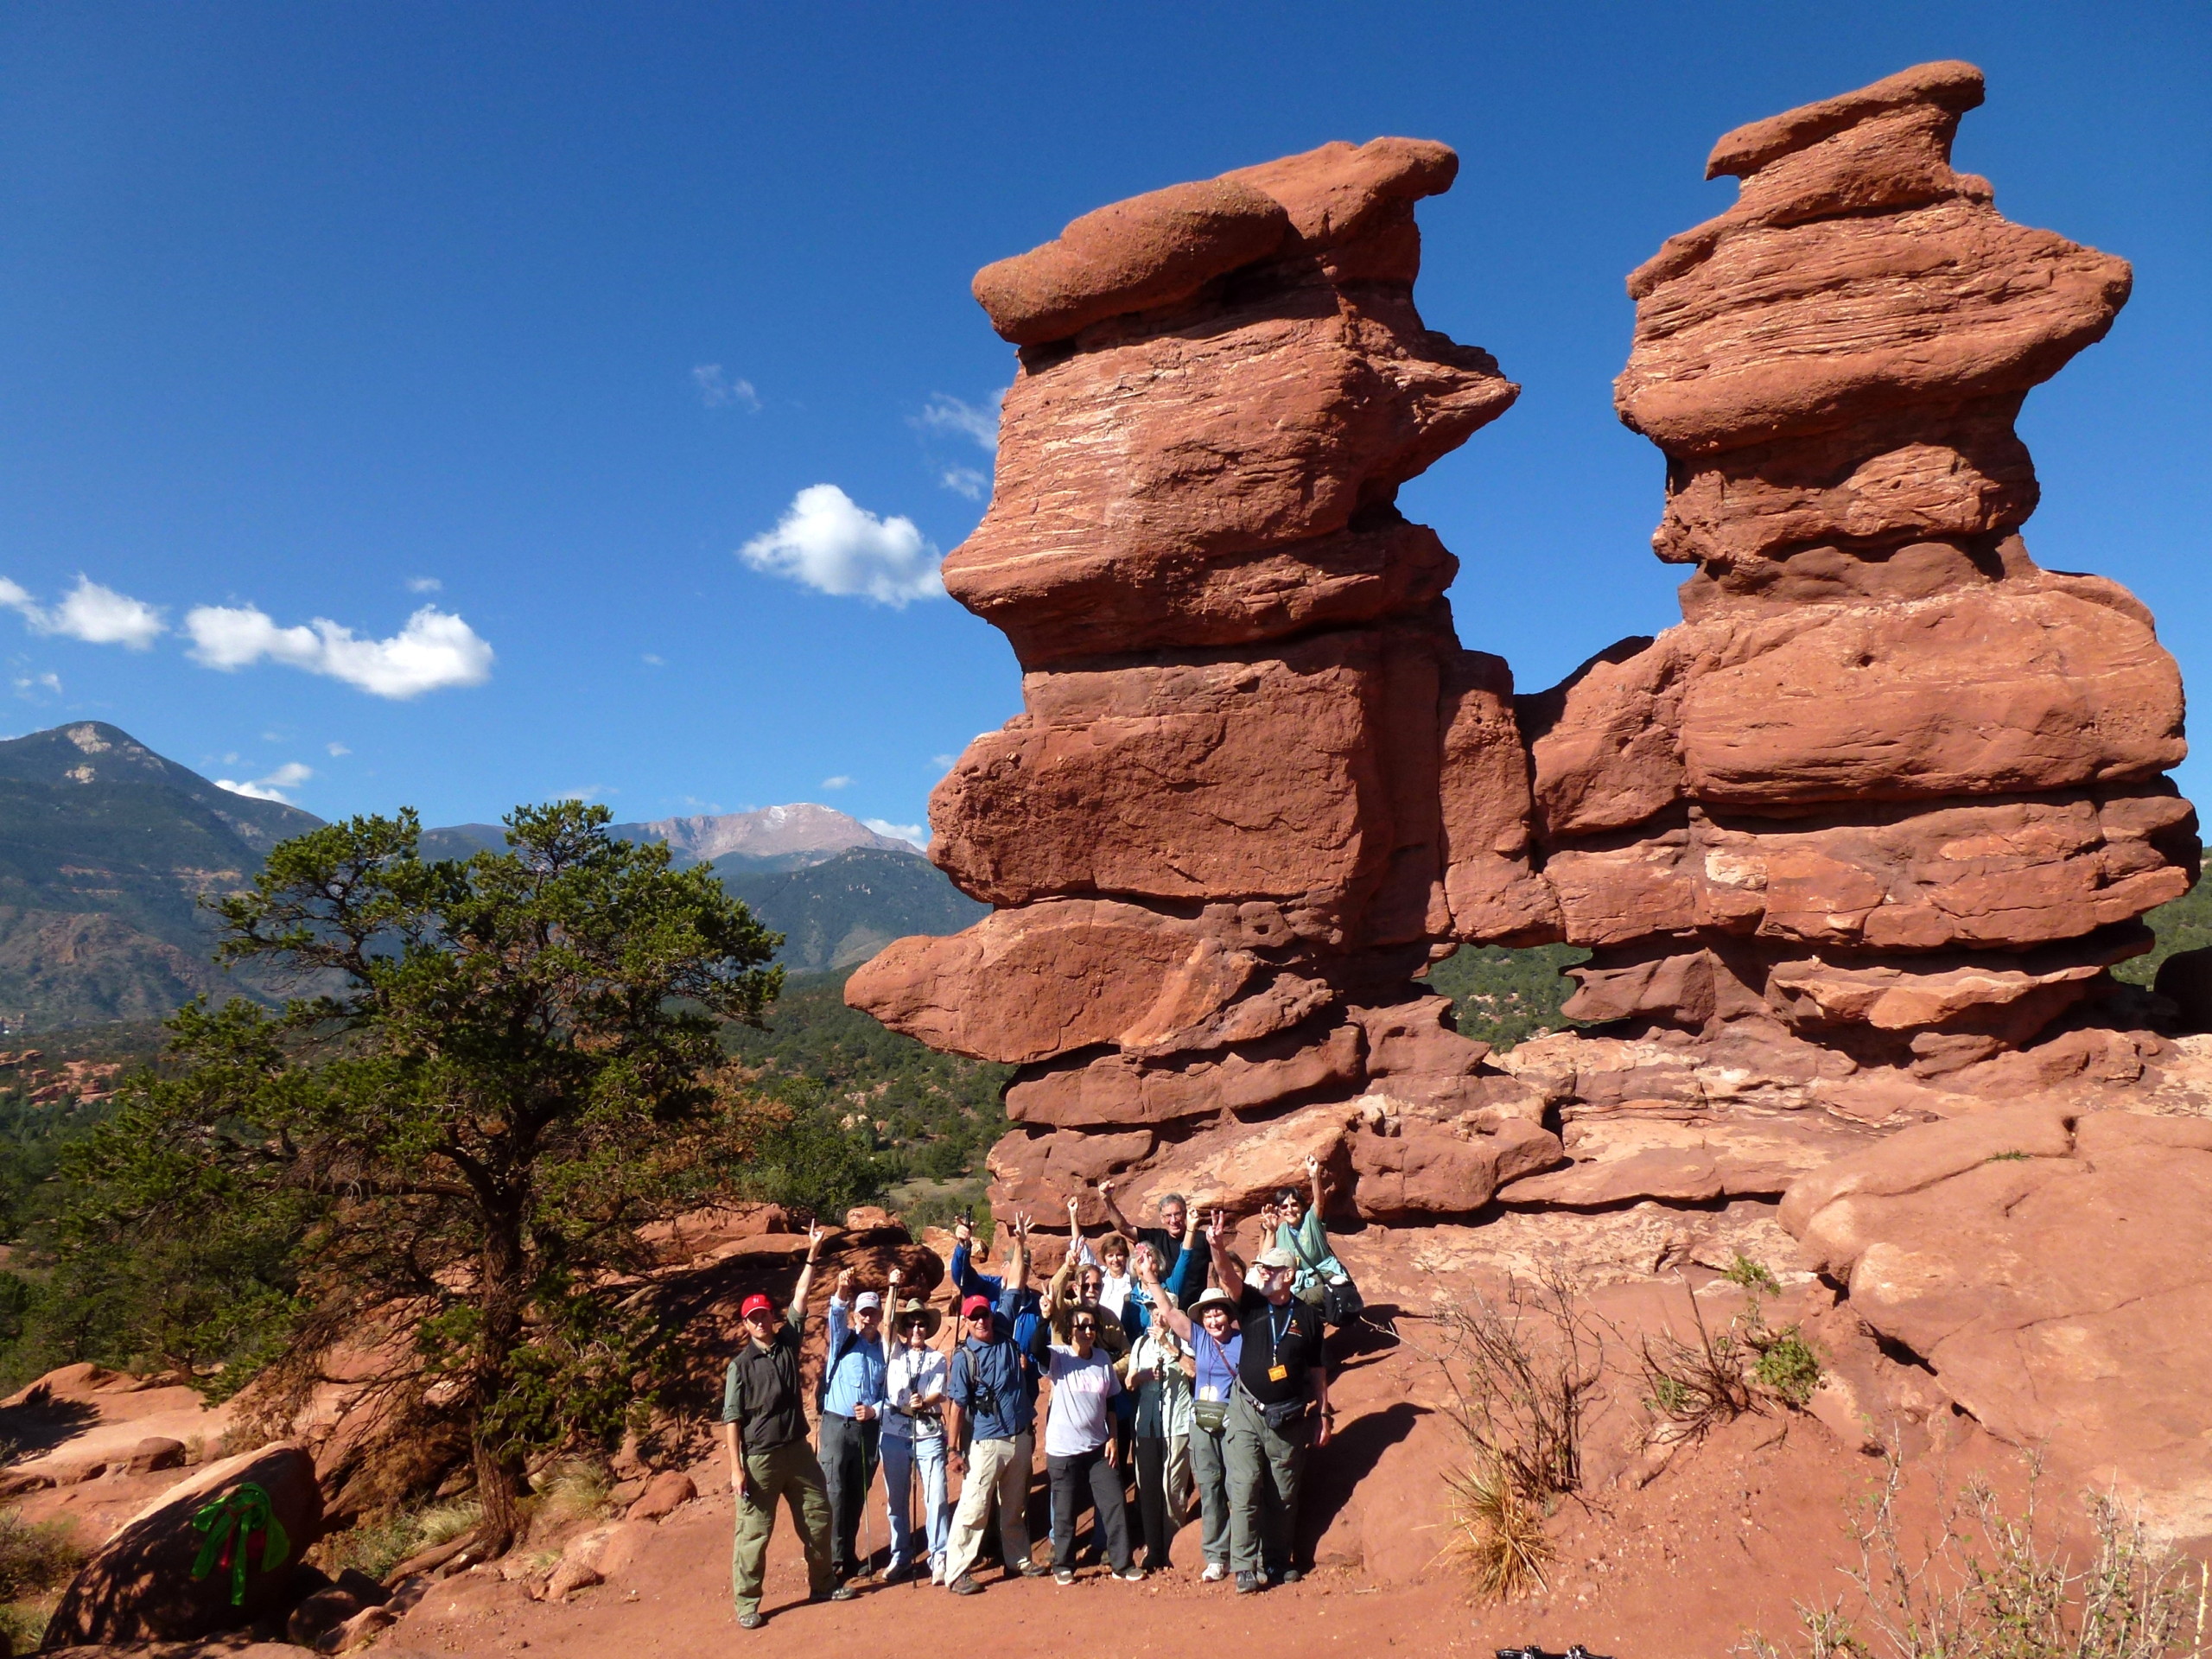 hikers by a red rock formation